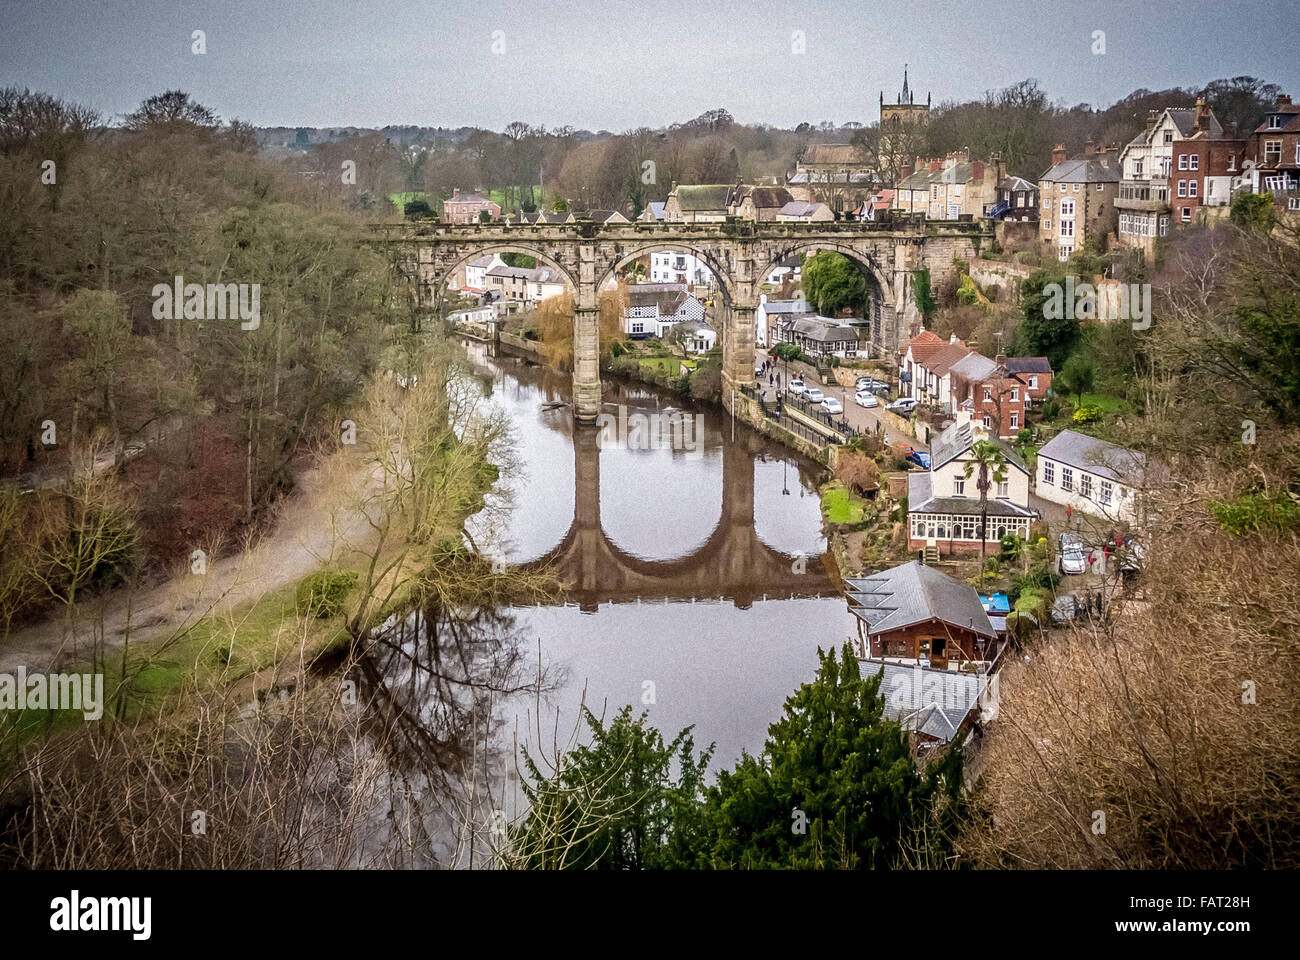 Stone viaduct over the River Nidd in Knaresborough, North Yorkshire. Stock Photo